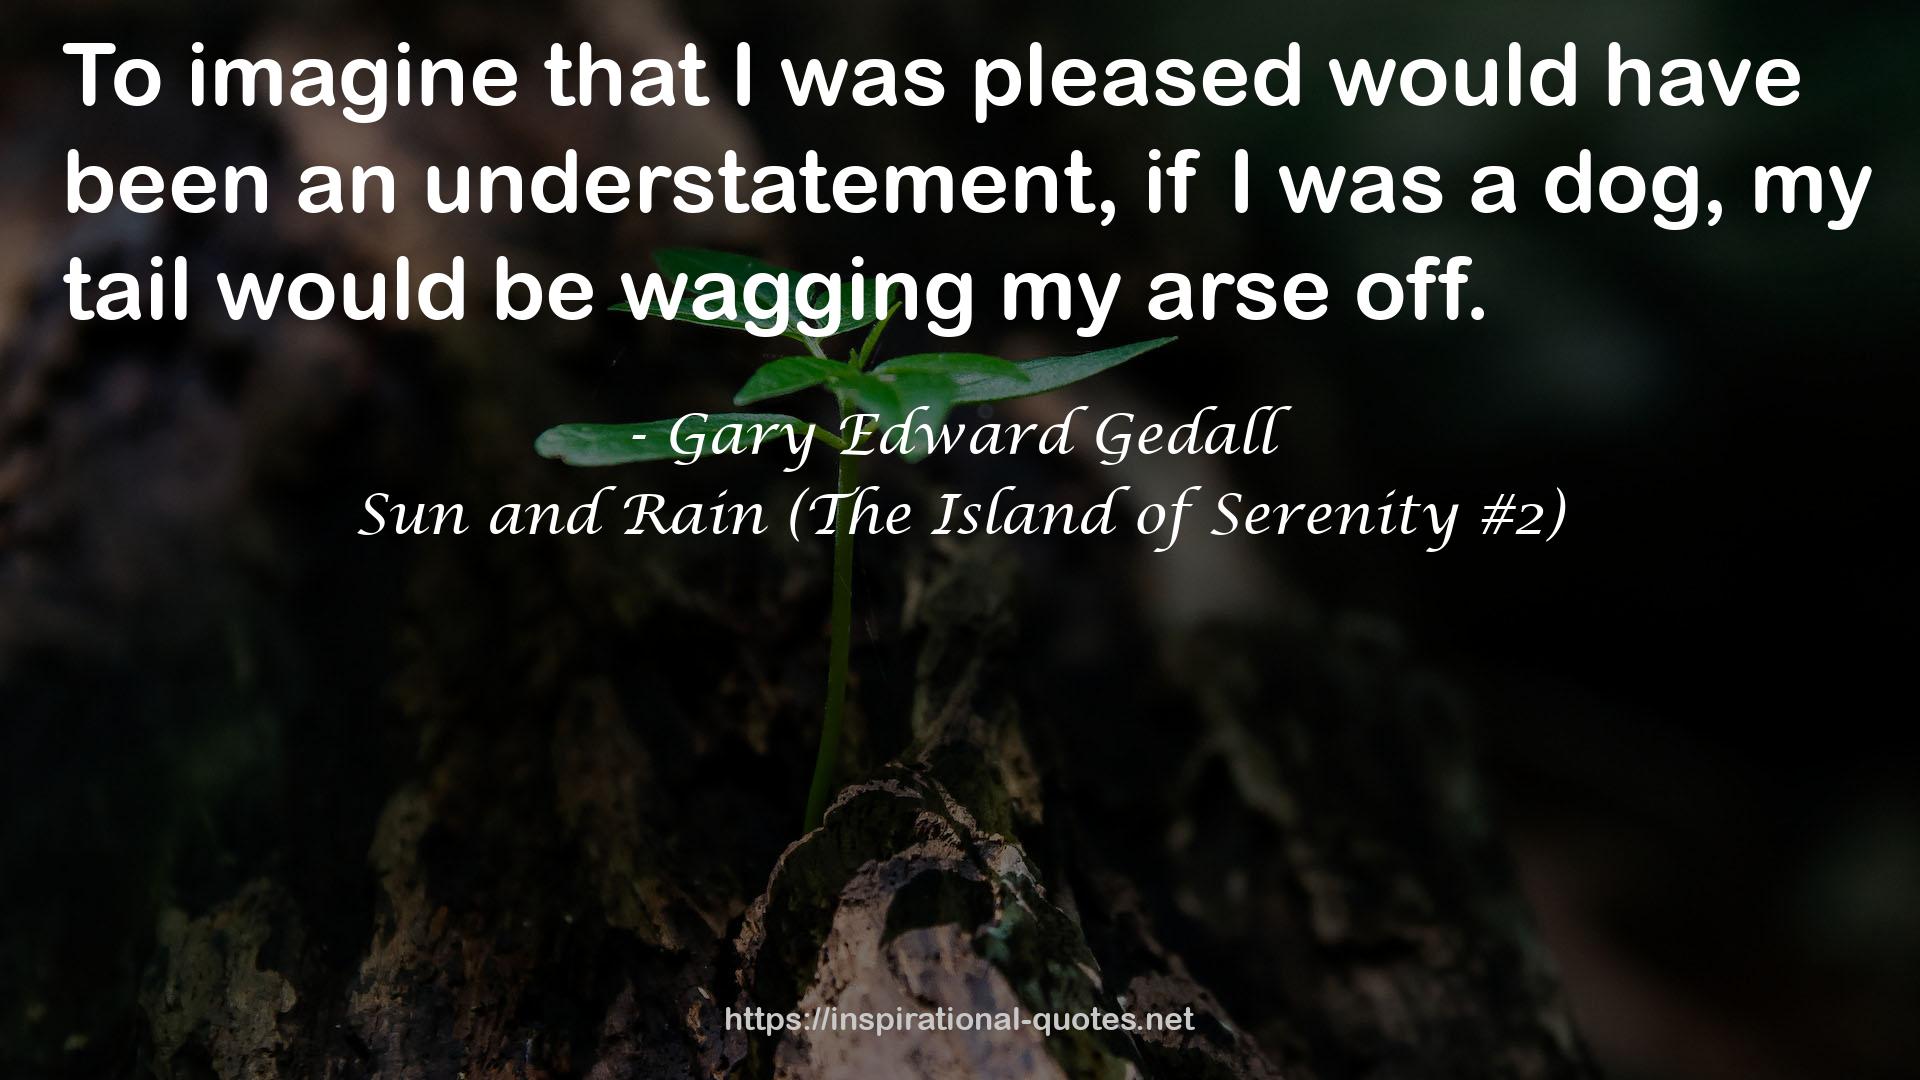 Gary Edward Gedall QUOTES